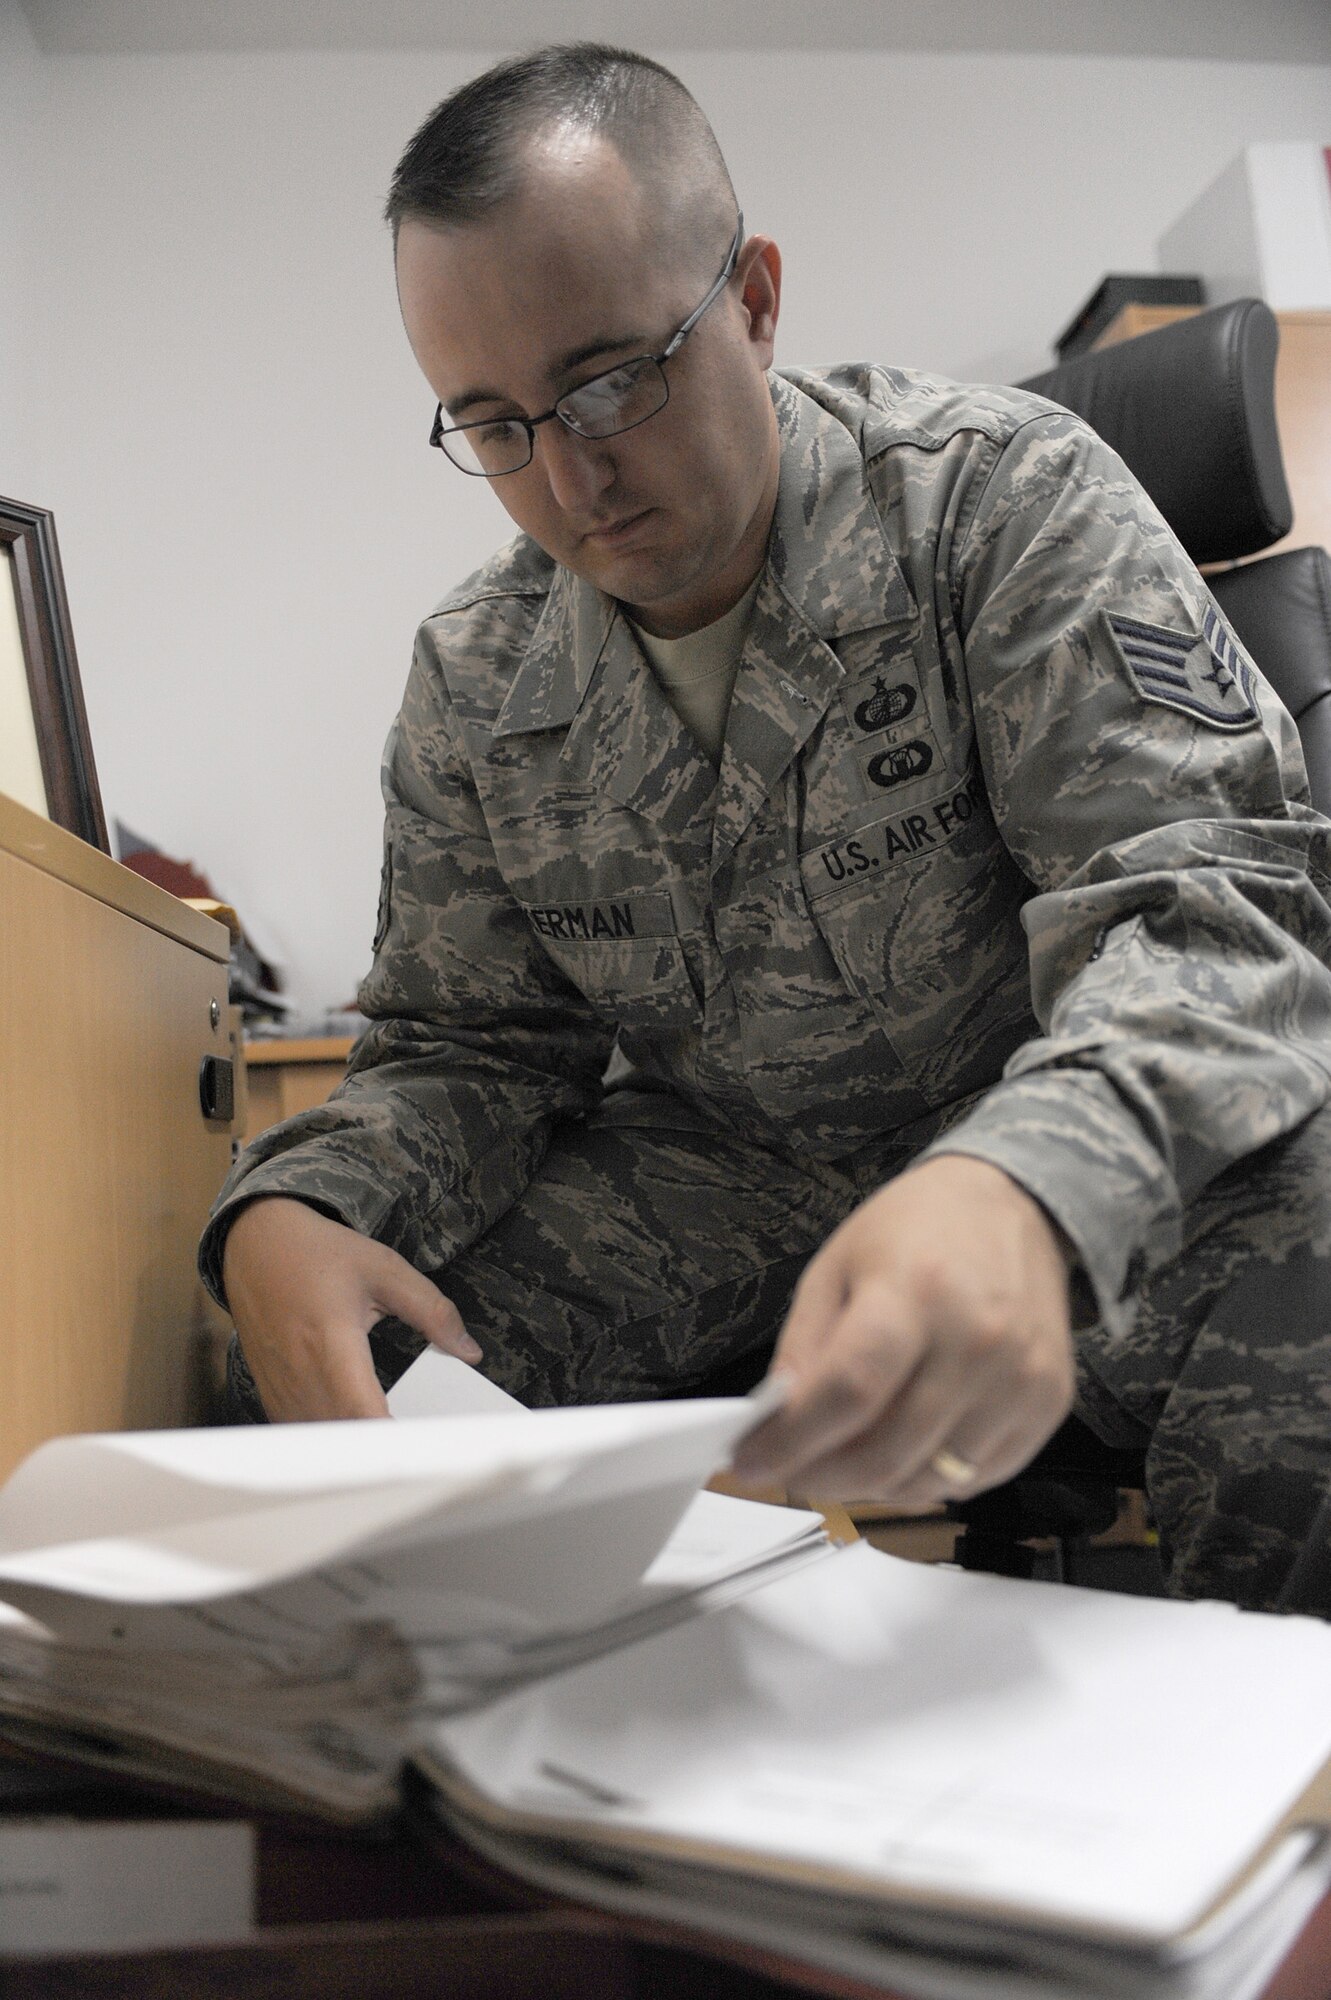 SOUTHWEST ASIA - Staff Sgt. Benjamin Ackerman, 380th Expeditionary Contracting Squadron, reviews a contract, July 6. Sergeant Ackerman works with vendors to provide equipment and supplies for the 380th mission. (U.S. Air Force photo by Senior Airman Brian J. Ellis)